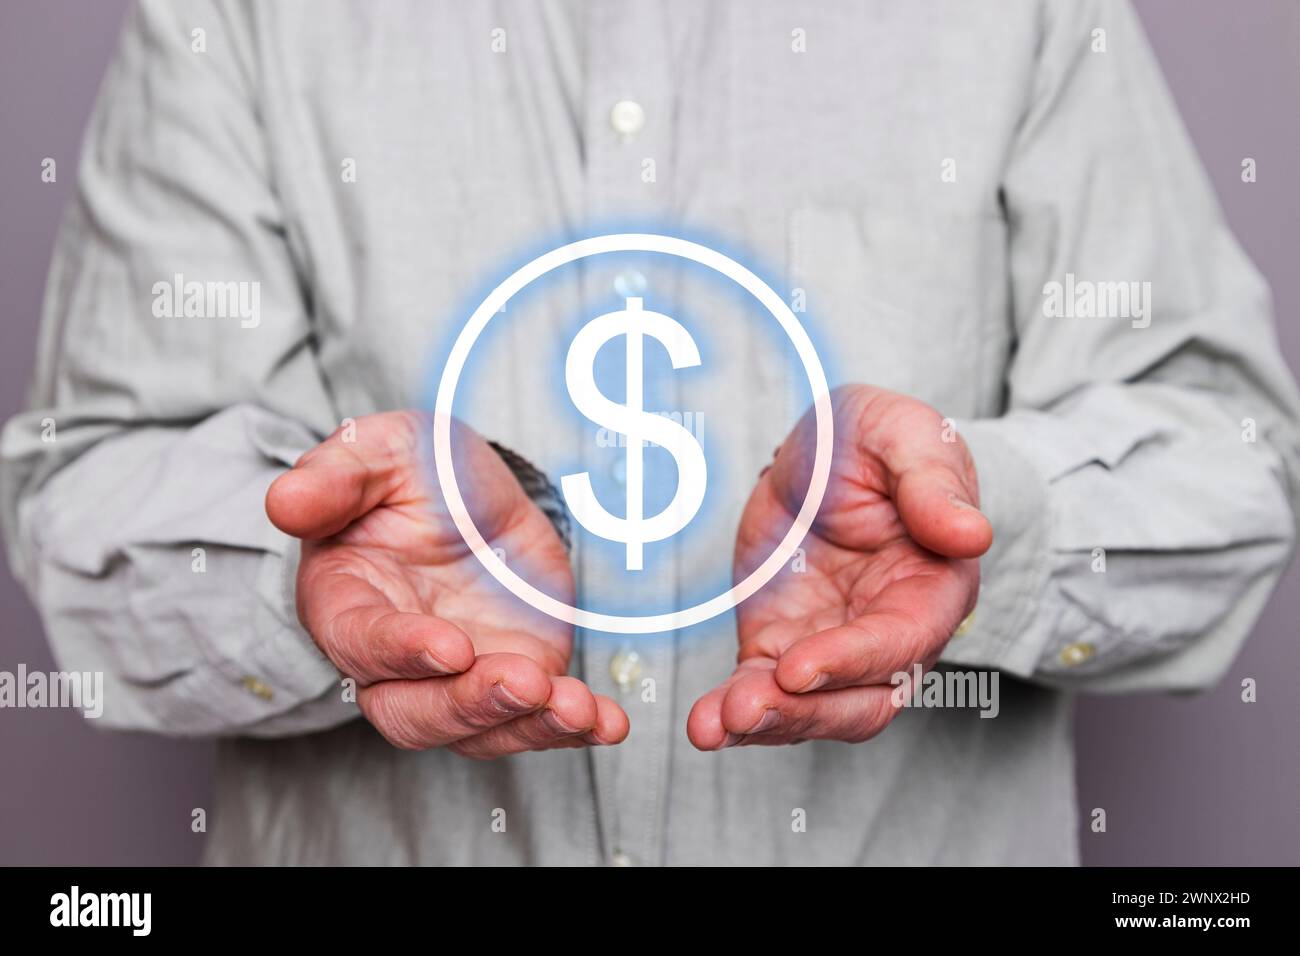 Close-up of an unrecognizable person's hands holding a floating circle with dollar symbol. Stock Photo